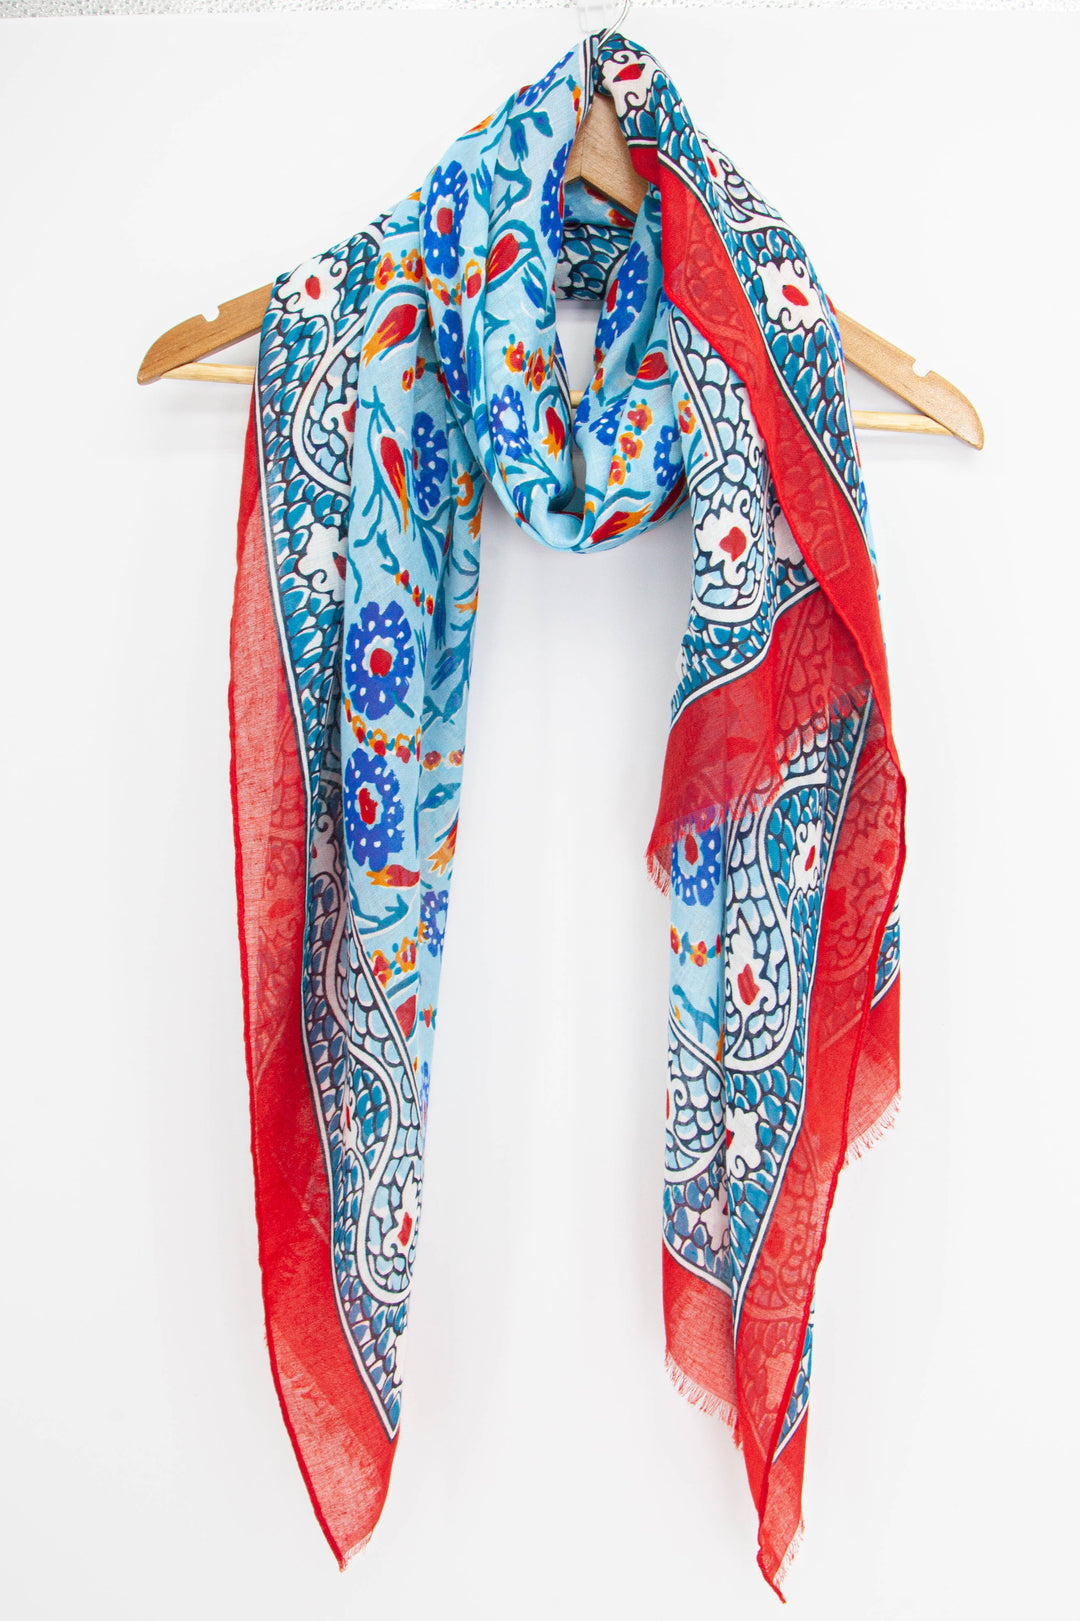 vintage paisley print scarf in blue draped around a coat hanger, showing the ornate pattern and contrasting red border trim